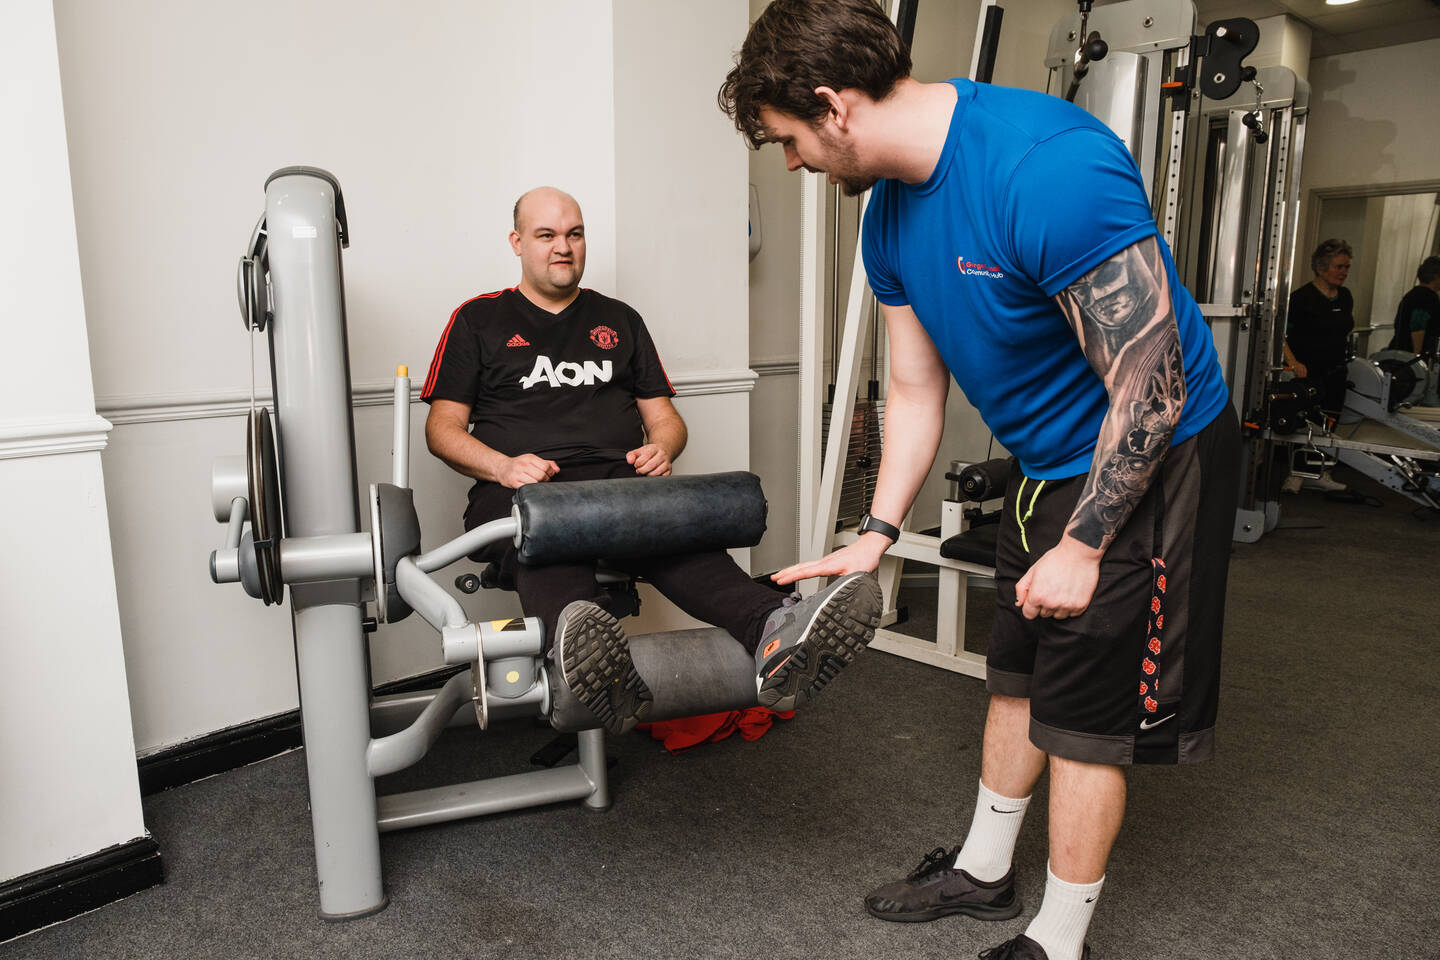 Fitness instructor supporting man to use a leg cable weight machine in the gym